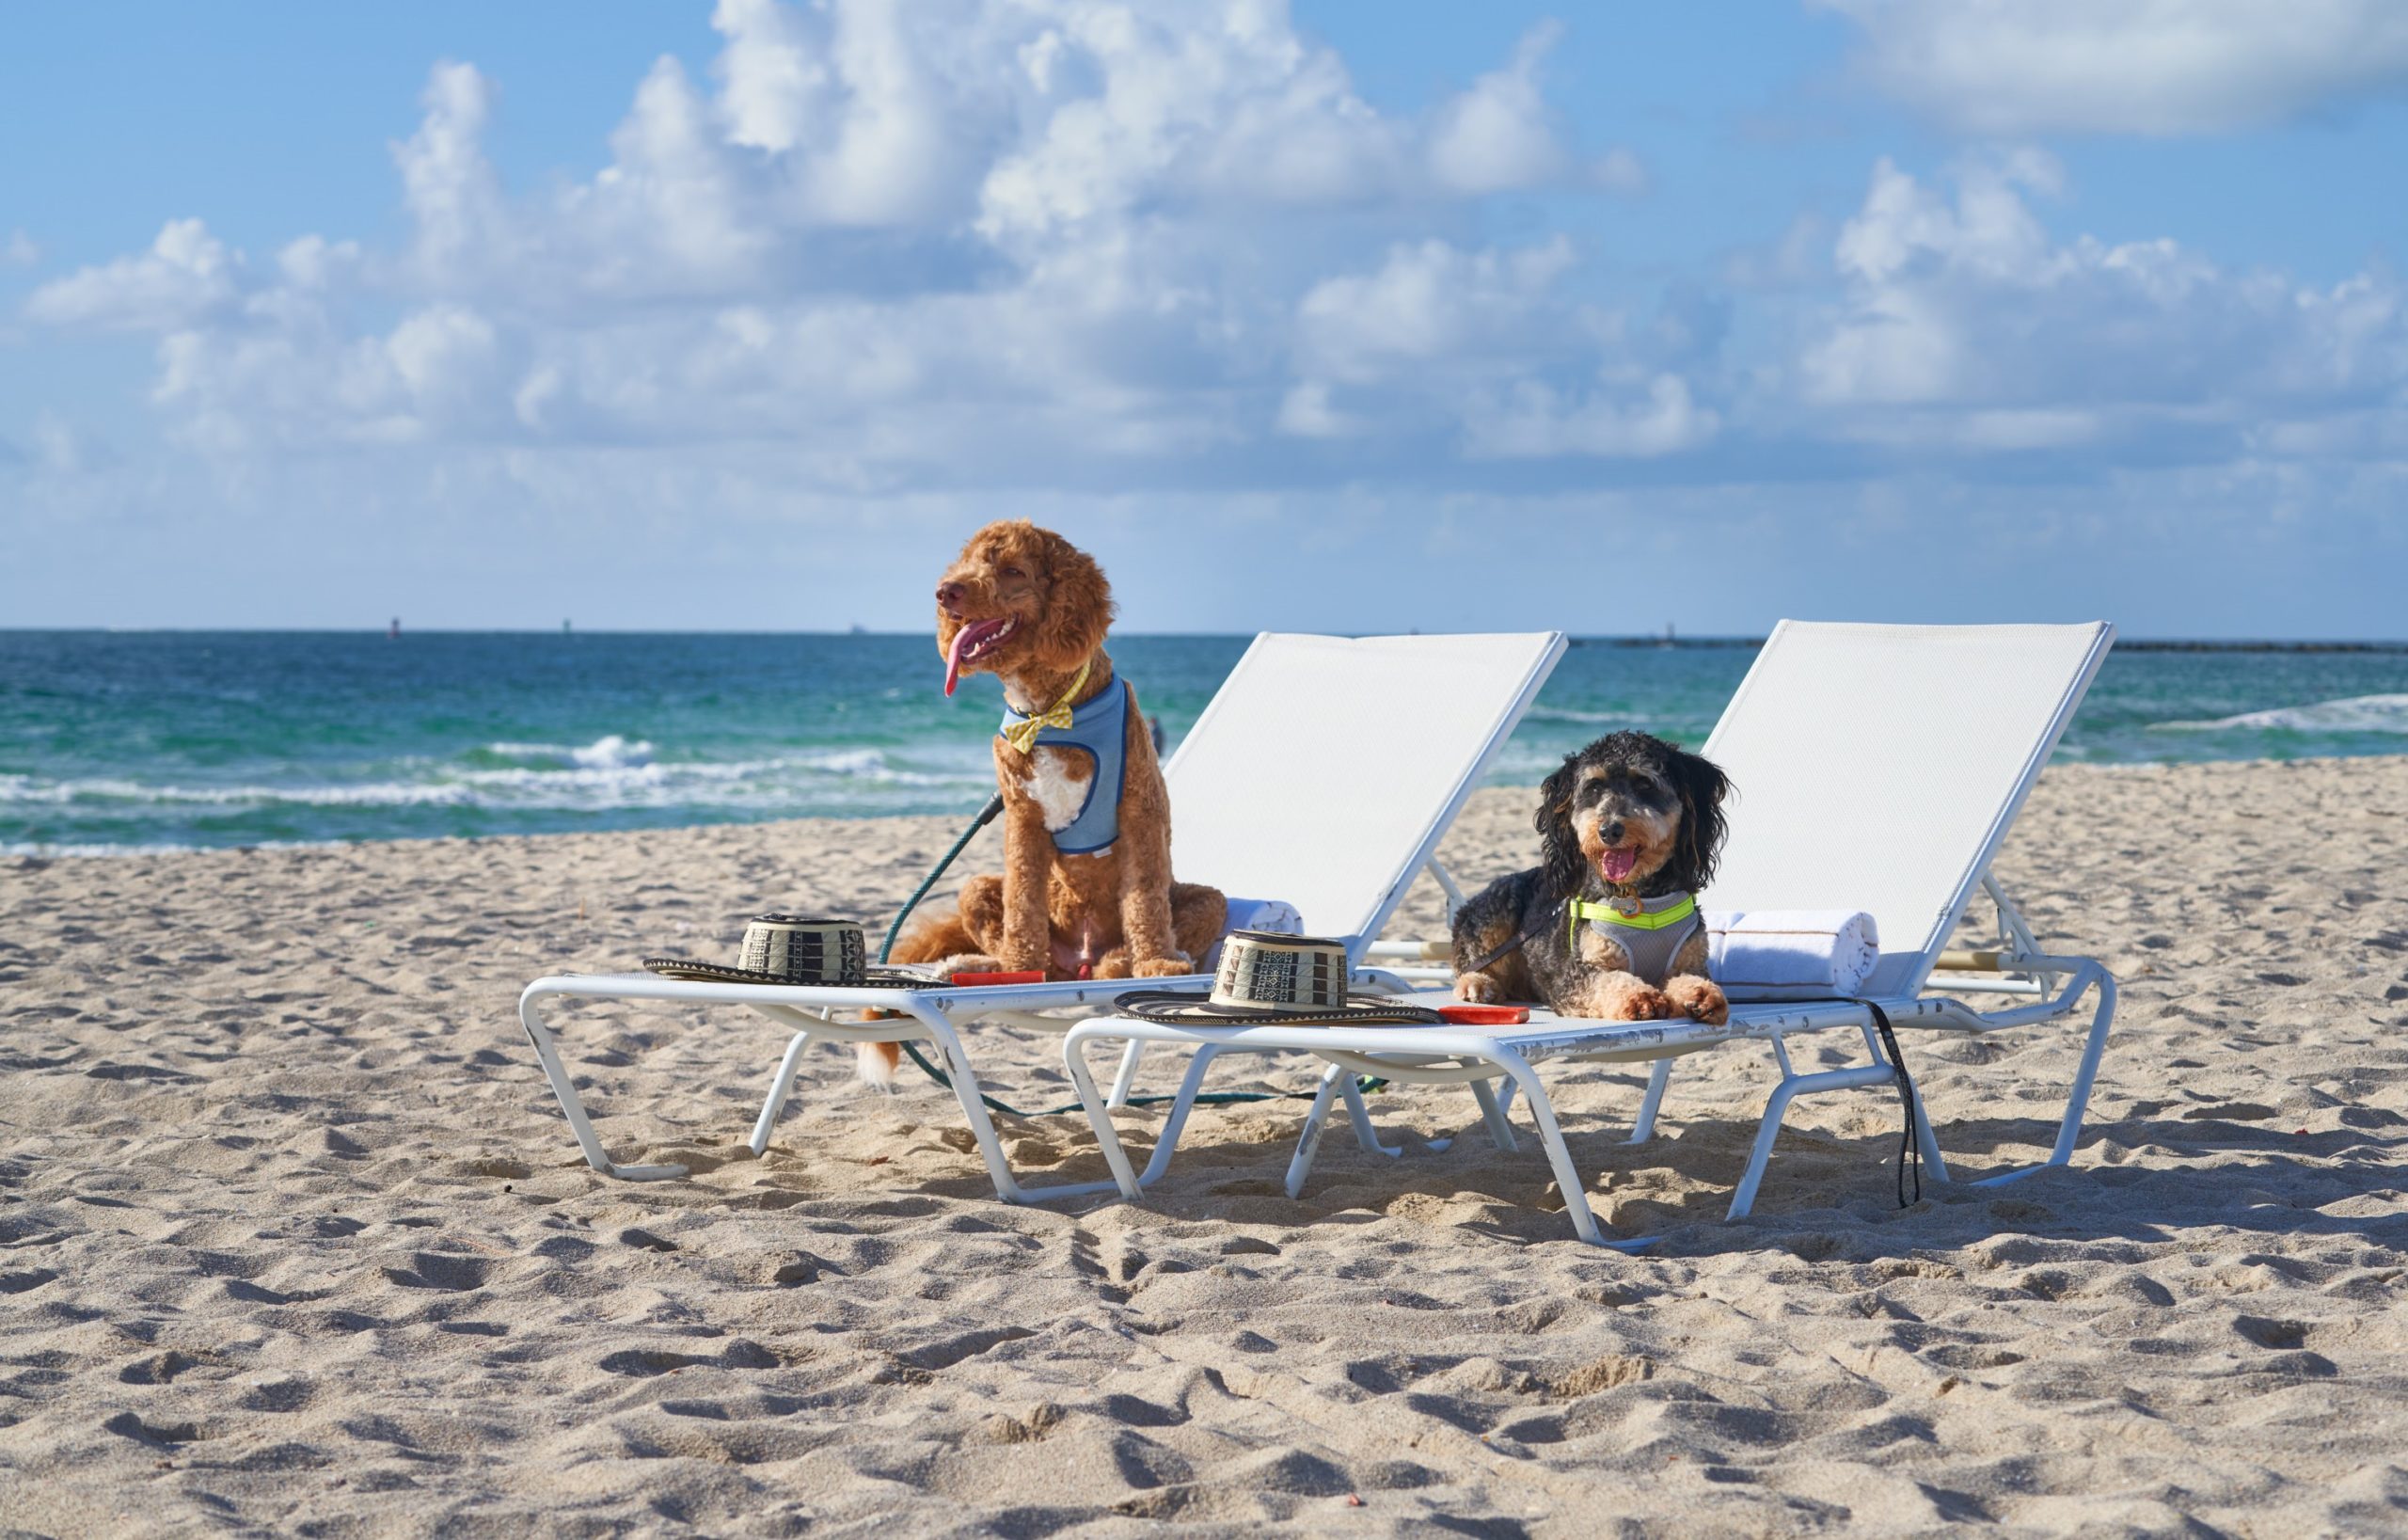 Dog Days of Summer: Best Pet-Friendly Hotels to Pamper Your Pup